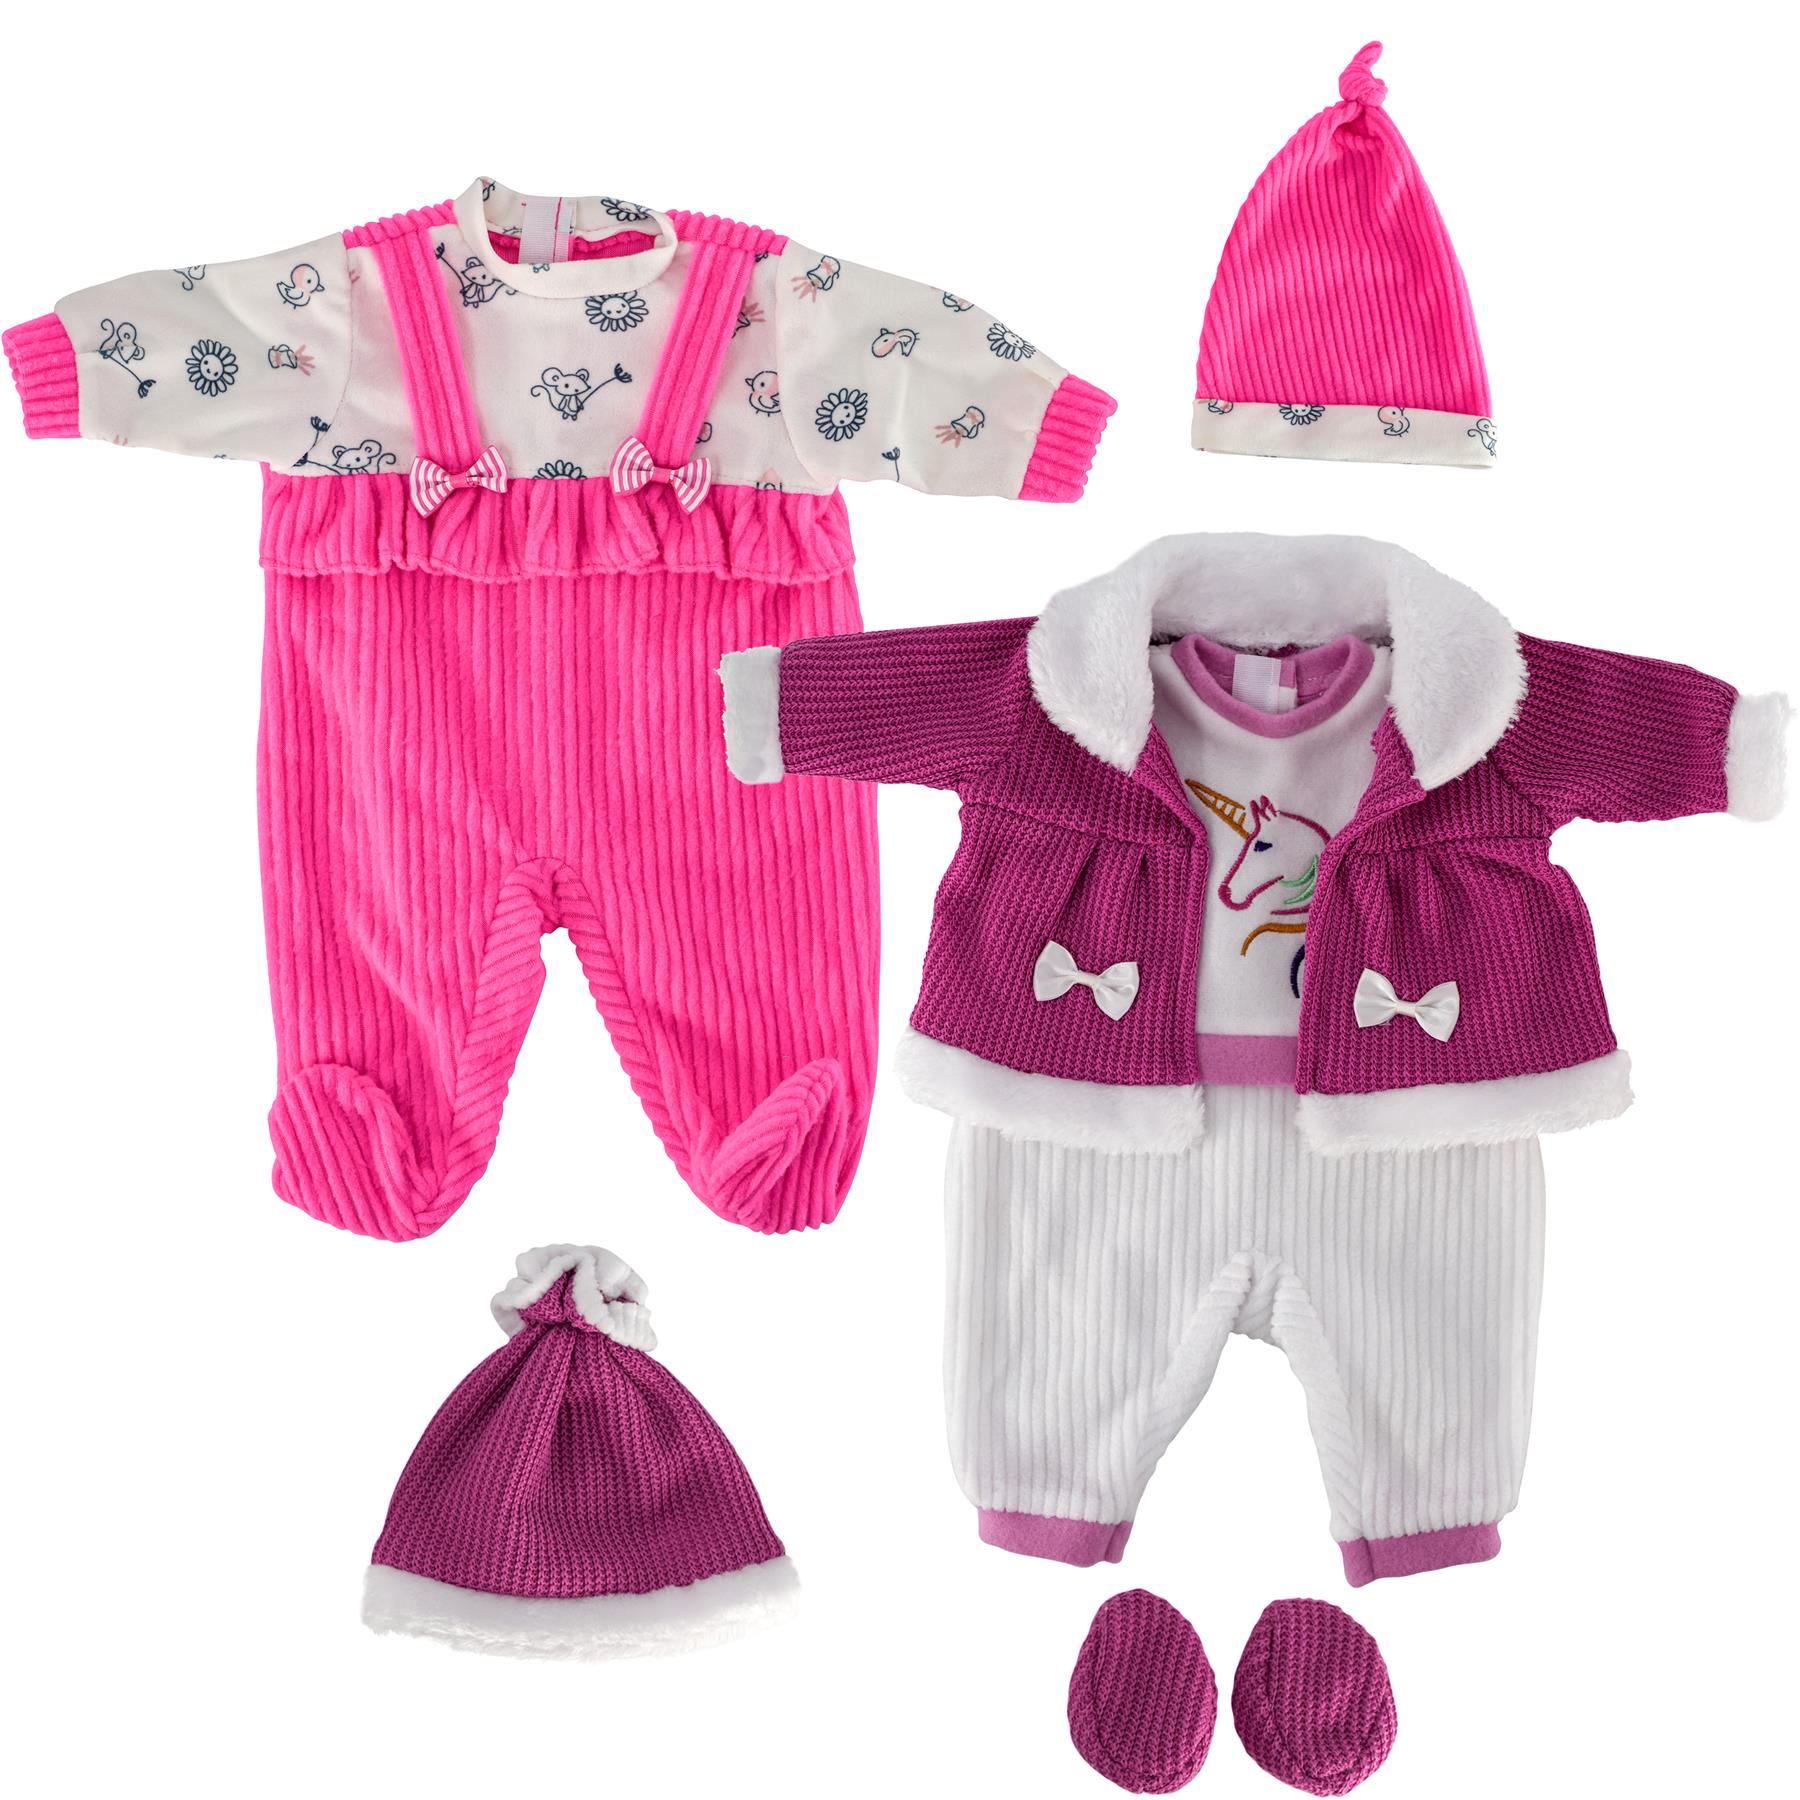 18" Baby Doll Hot Pink and Purple Clothes Set by BiBi Doll - UKBuyZone